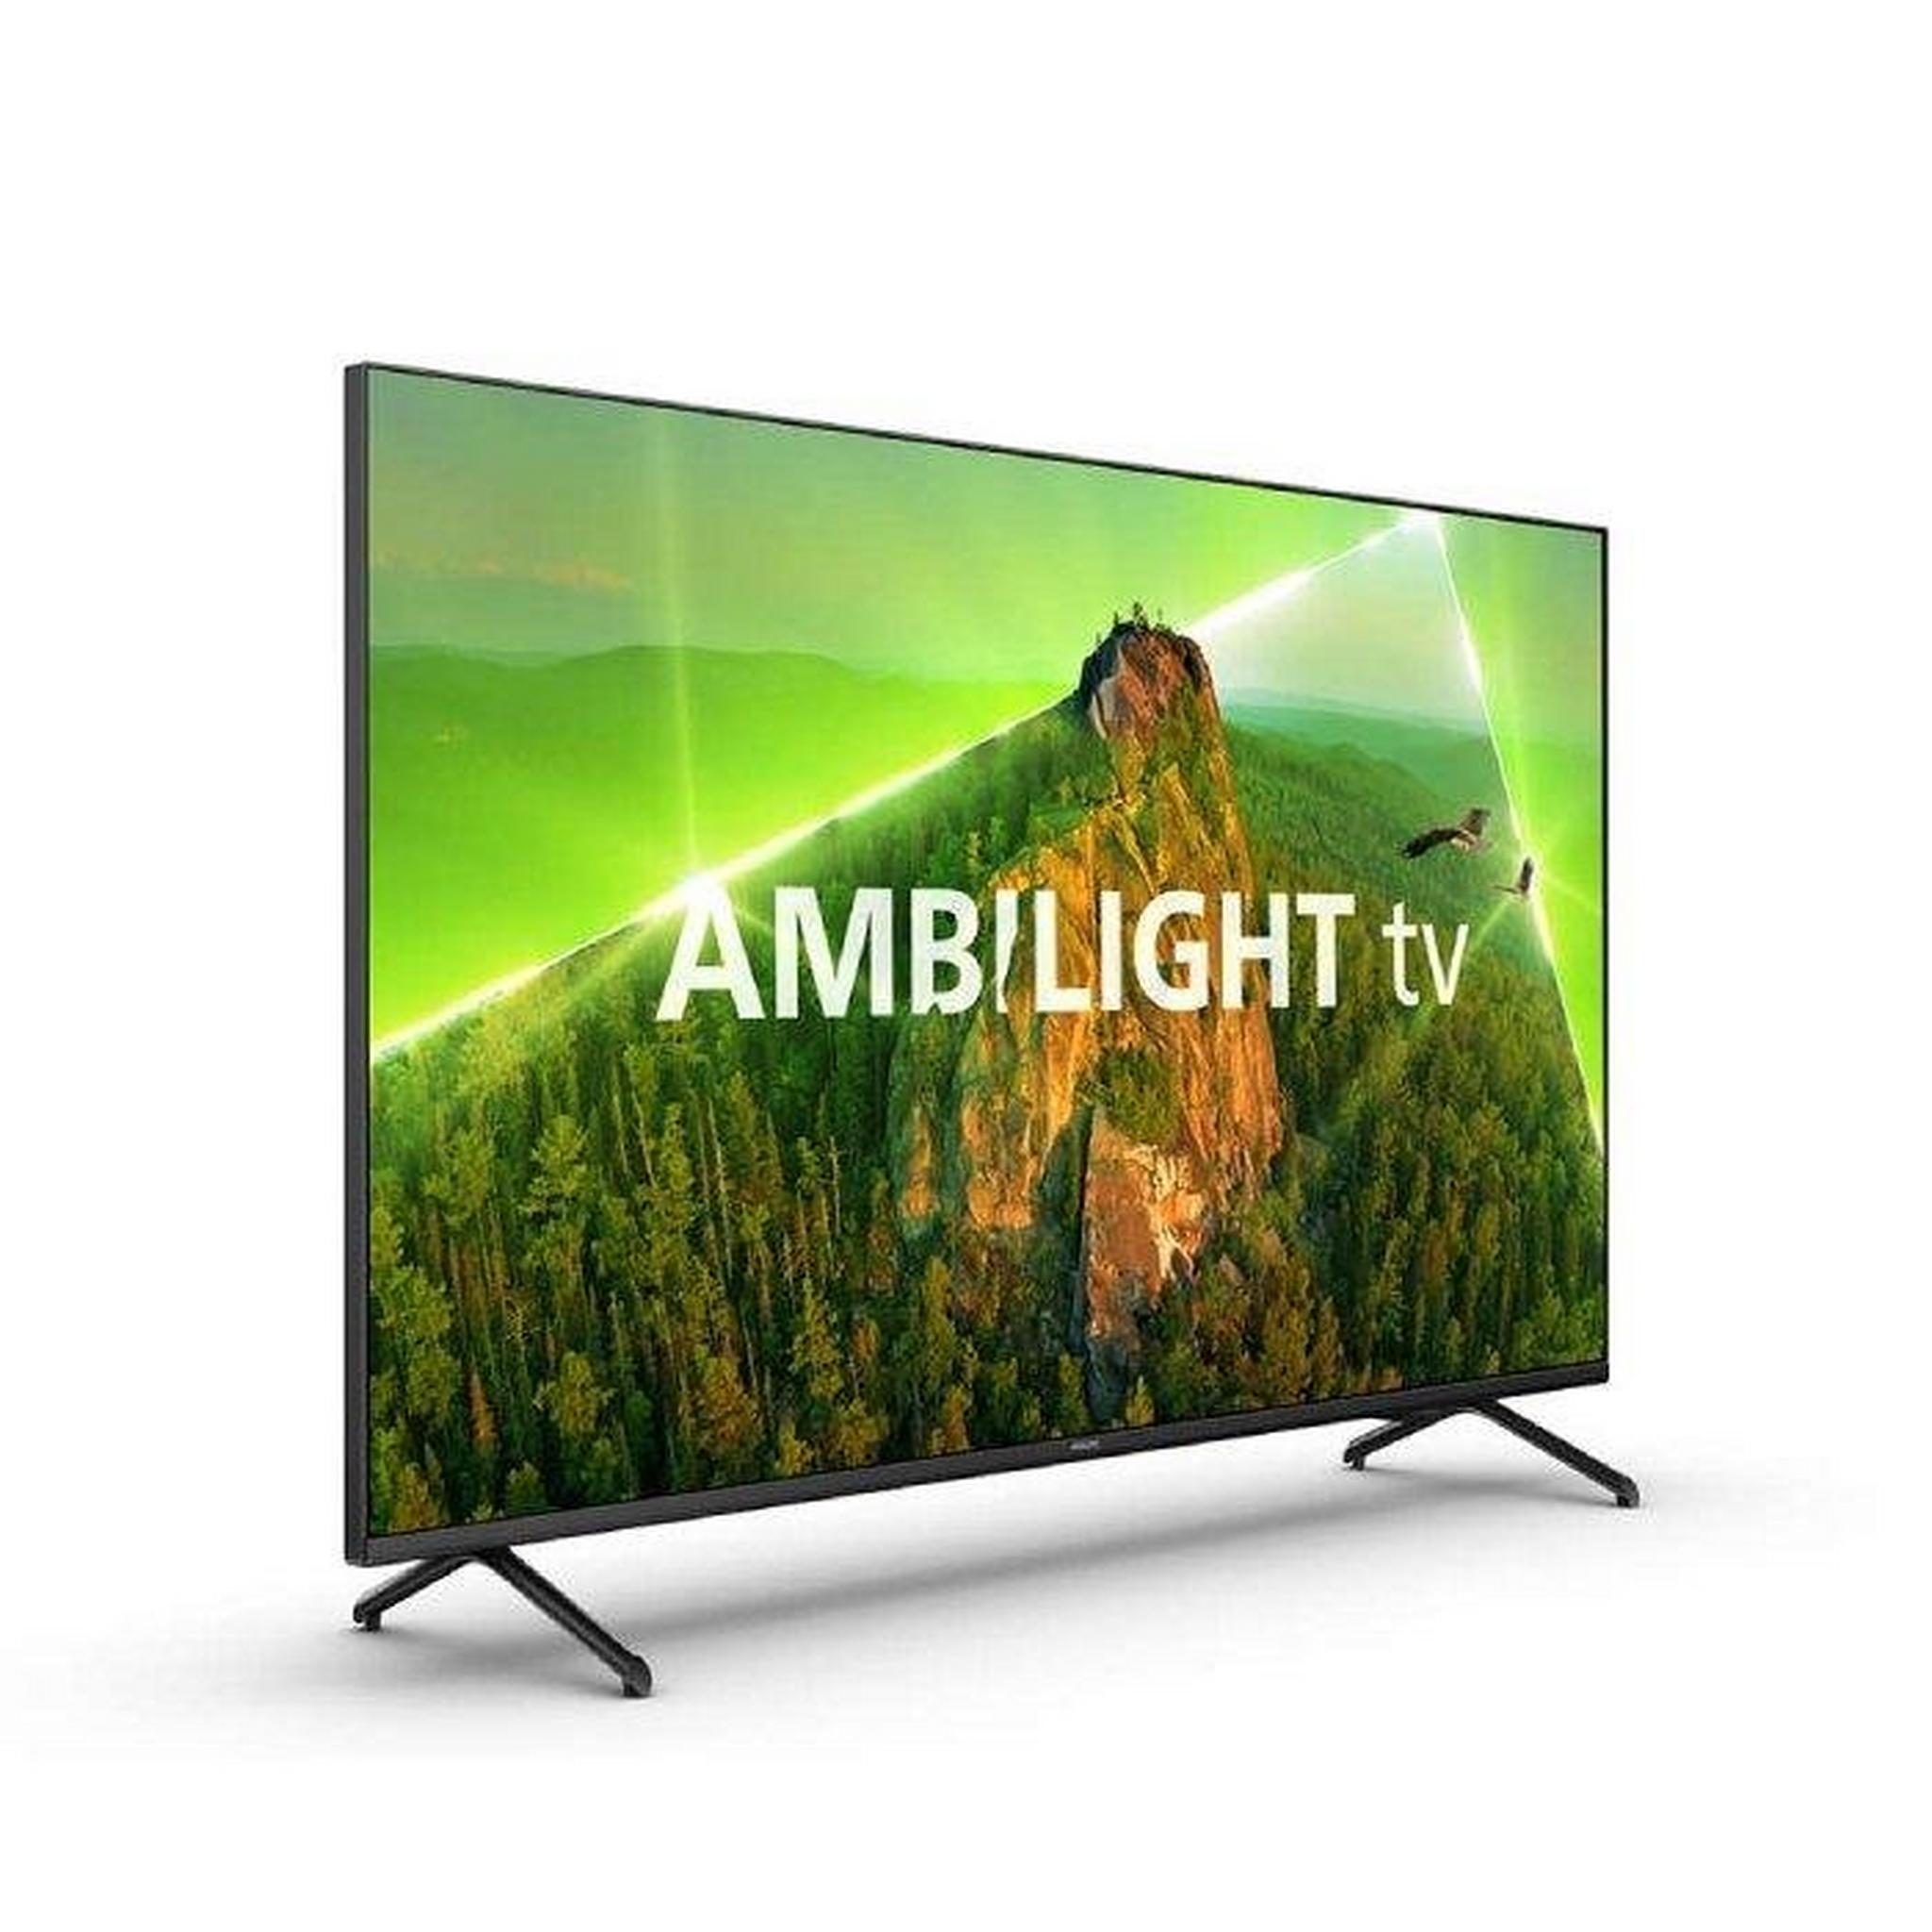 PHILIPS 50-inch 4K UHD LED Ambilight Smart Android TV, 50PUT7908/56 – Black